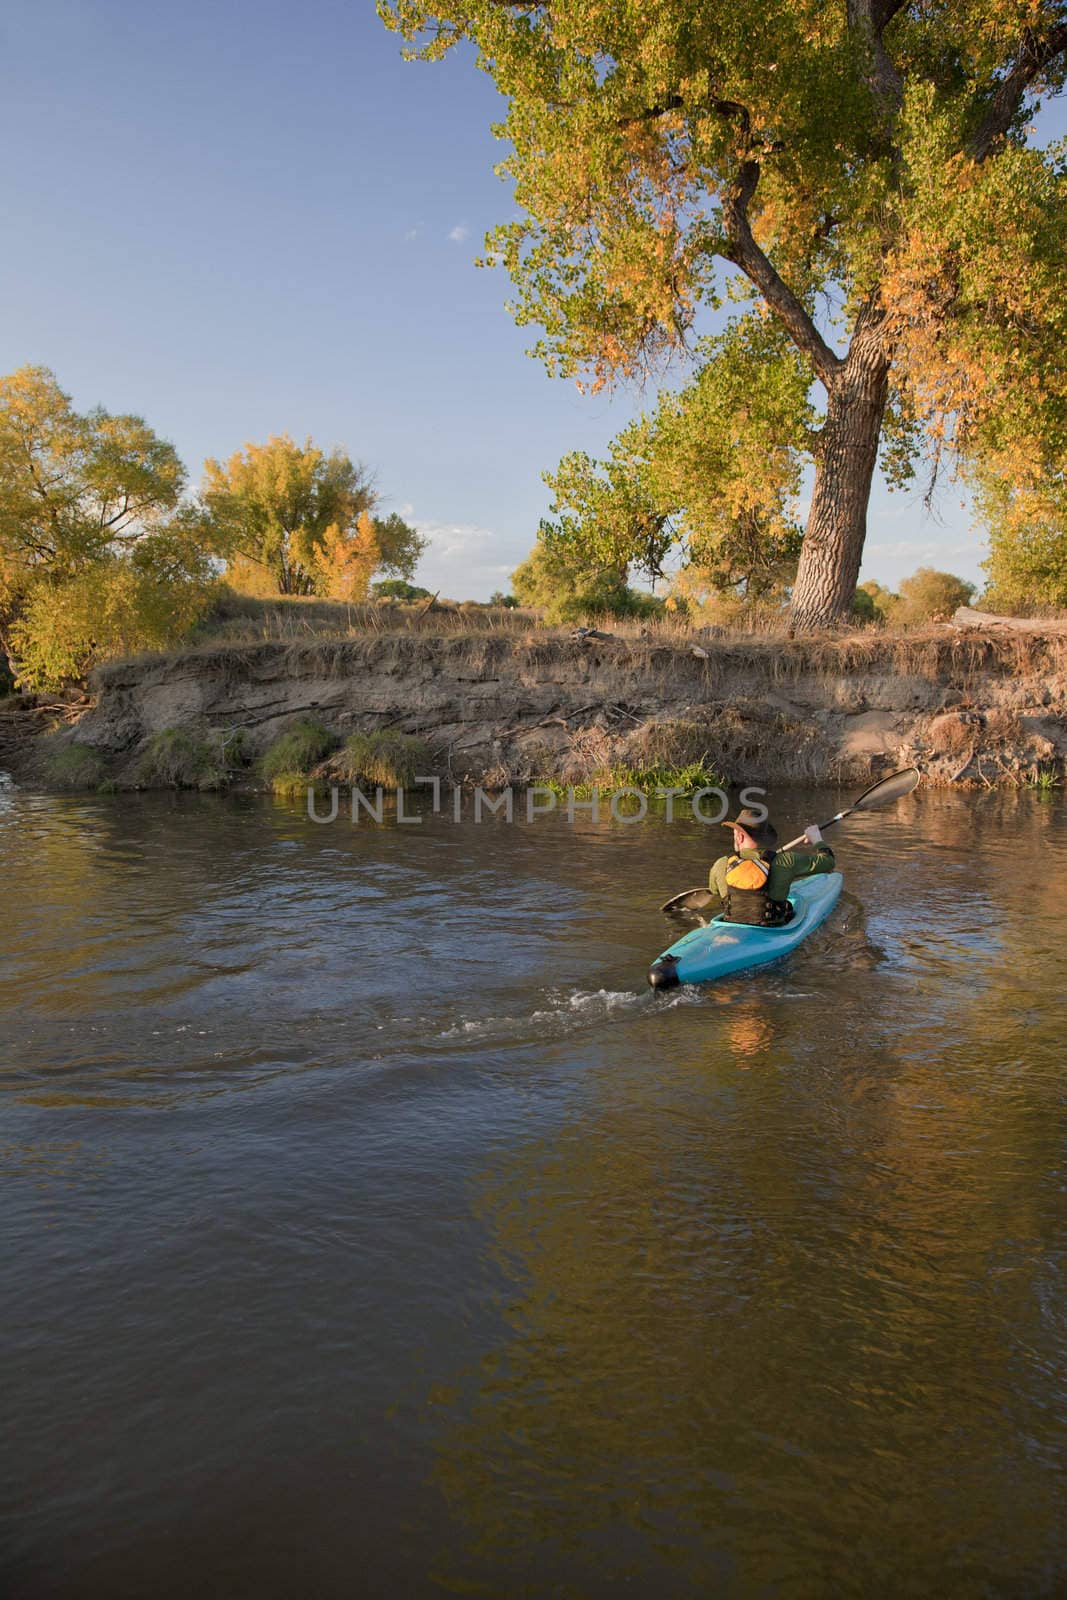 kayaker (fifty five years old male) paddling a blue, plastic, whitewater kayak on a small river in autumn scenery, Saint Vrain Creek in eastern Colorado